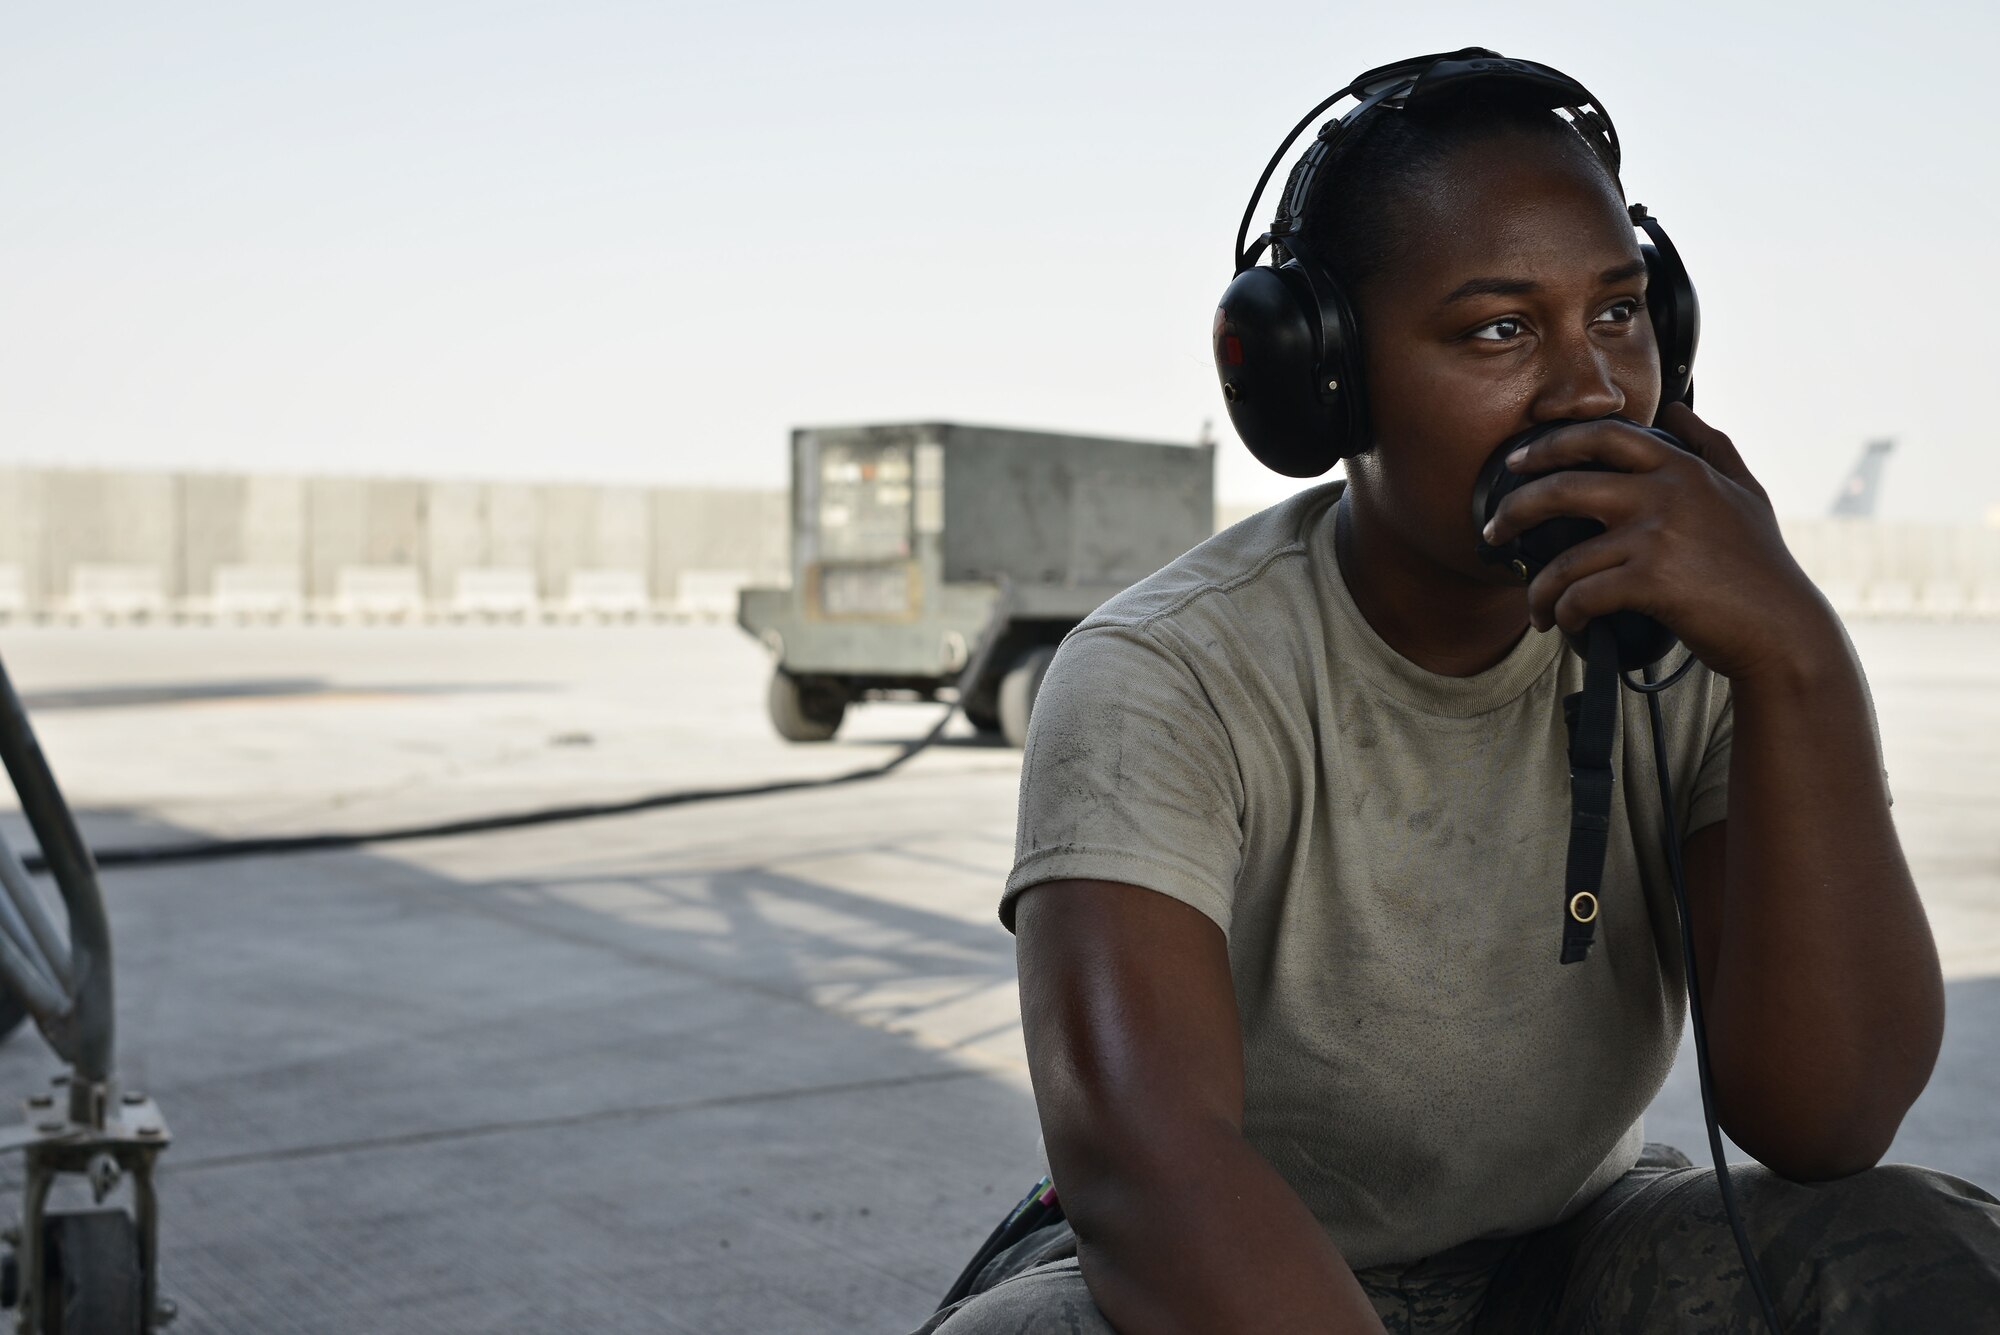 Airman 1st Class Sade, 28th Aircraft Maintenance Squadron crew chief, listens to another crew chief inside a B-1 bomber while completing operation checks during post-flight inspections Sept. 22, 2015 at Al Udeid Air Base, Qatar. Sade was deployed out of Ellsworth Air Force Base, S.D. (U.S. Air Force photo by Staff Sgt. Alexandre Montes/Released)